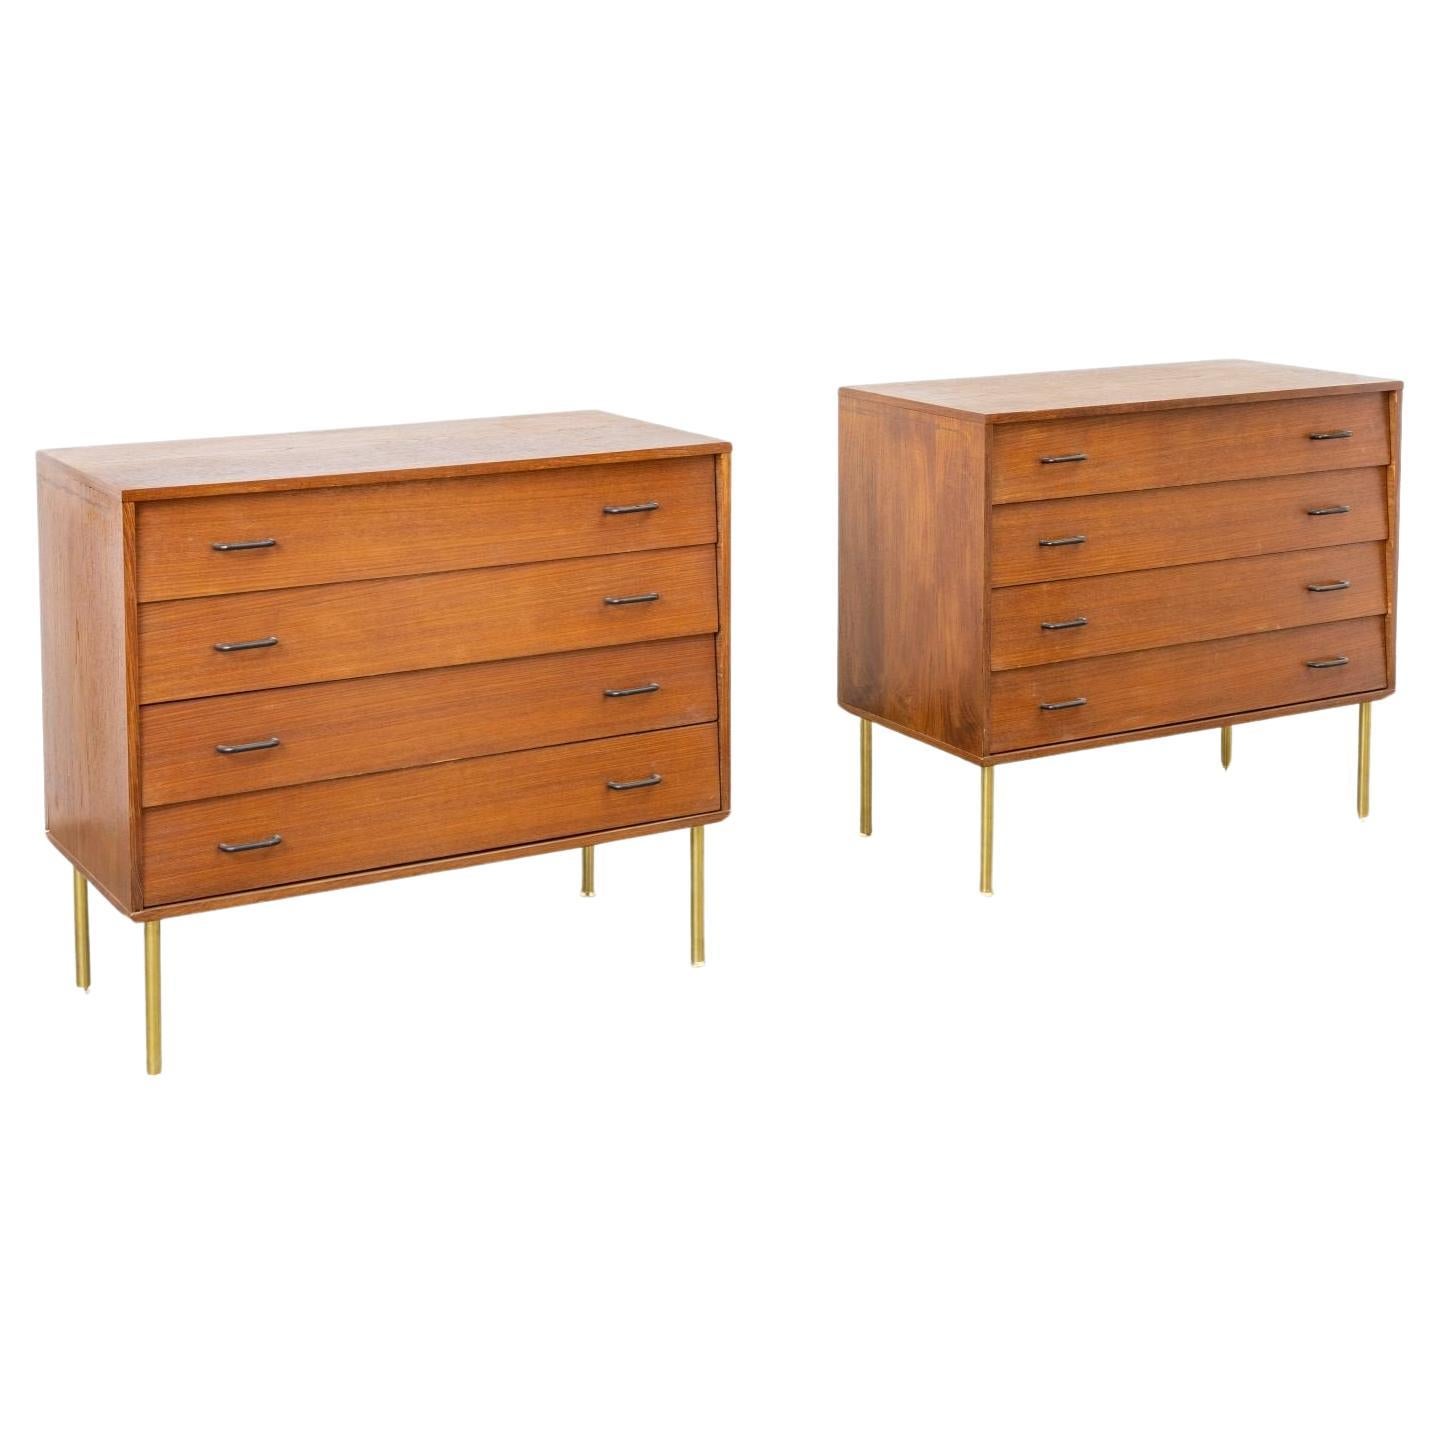 Pair of "Gio Ponti" style chest of drawers manufactured by Isa Bergamo, 1950s